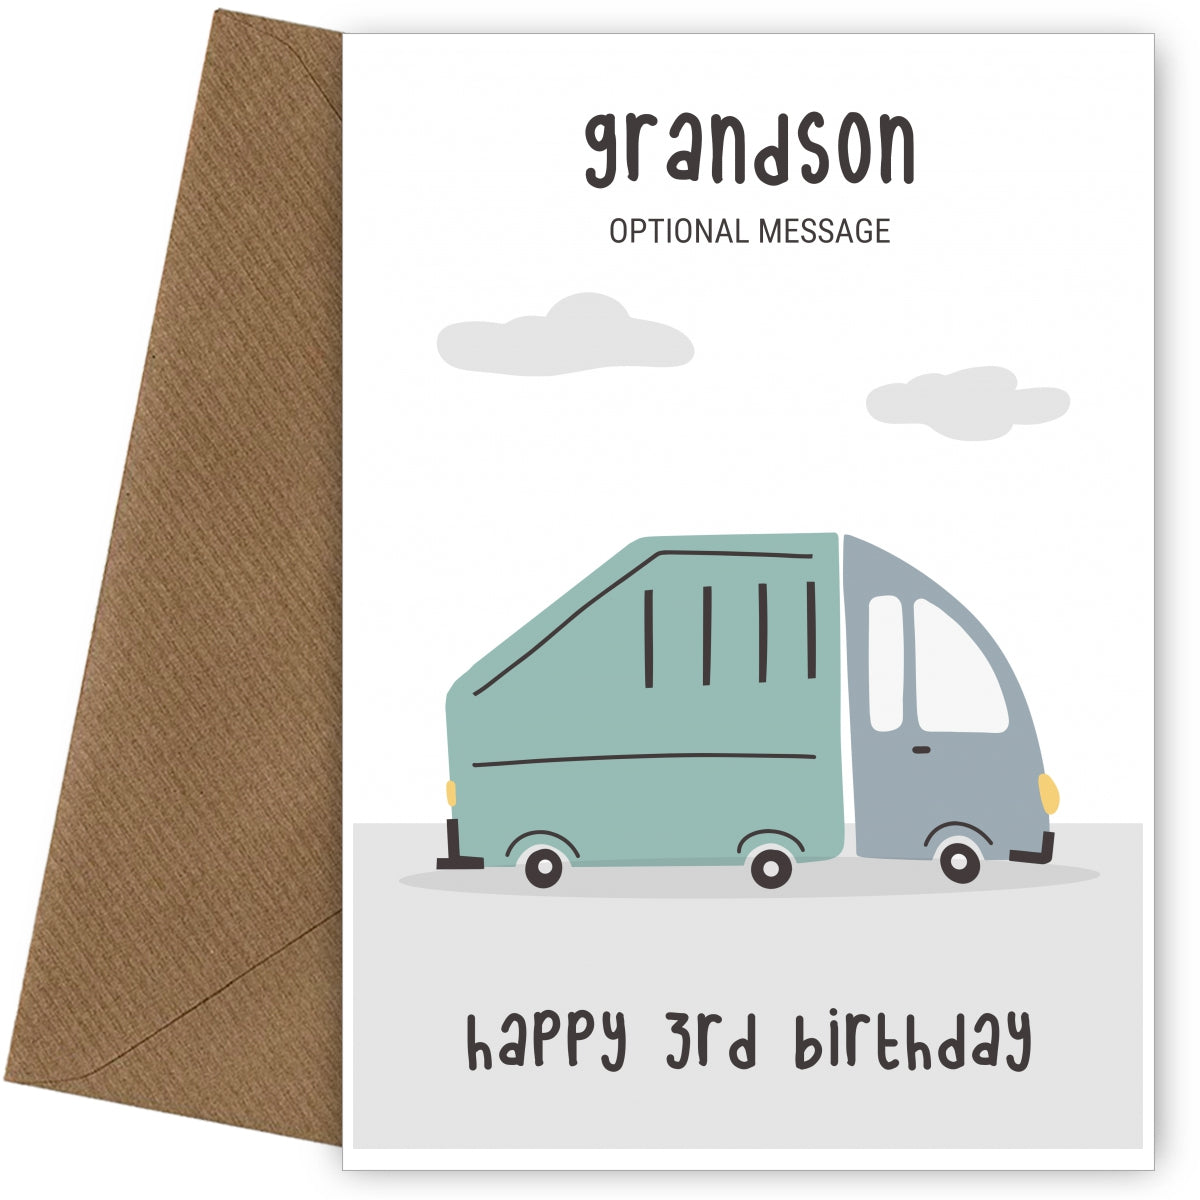 Fun Vehicles 3rd Birthday Card for Grandson - Garbage Truck